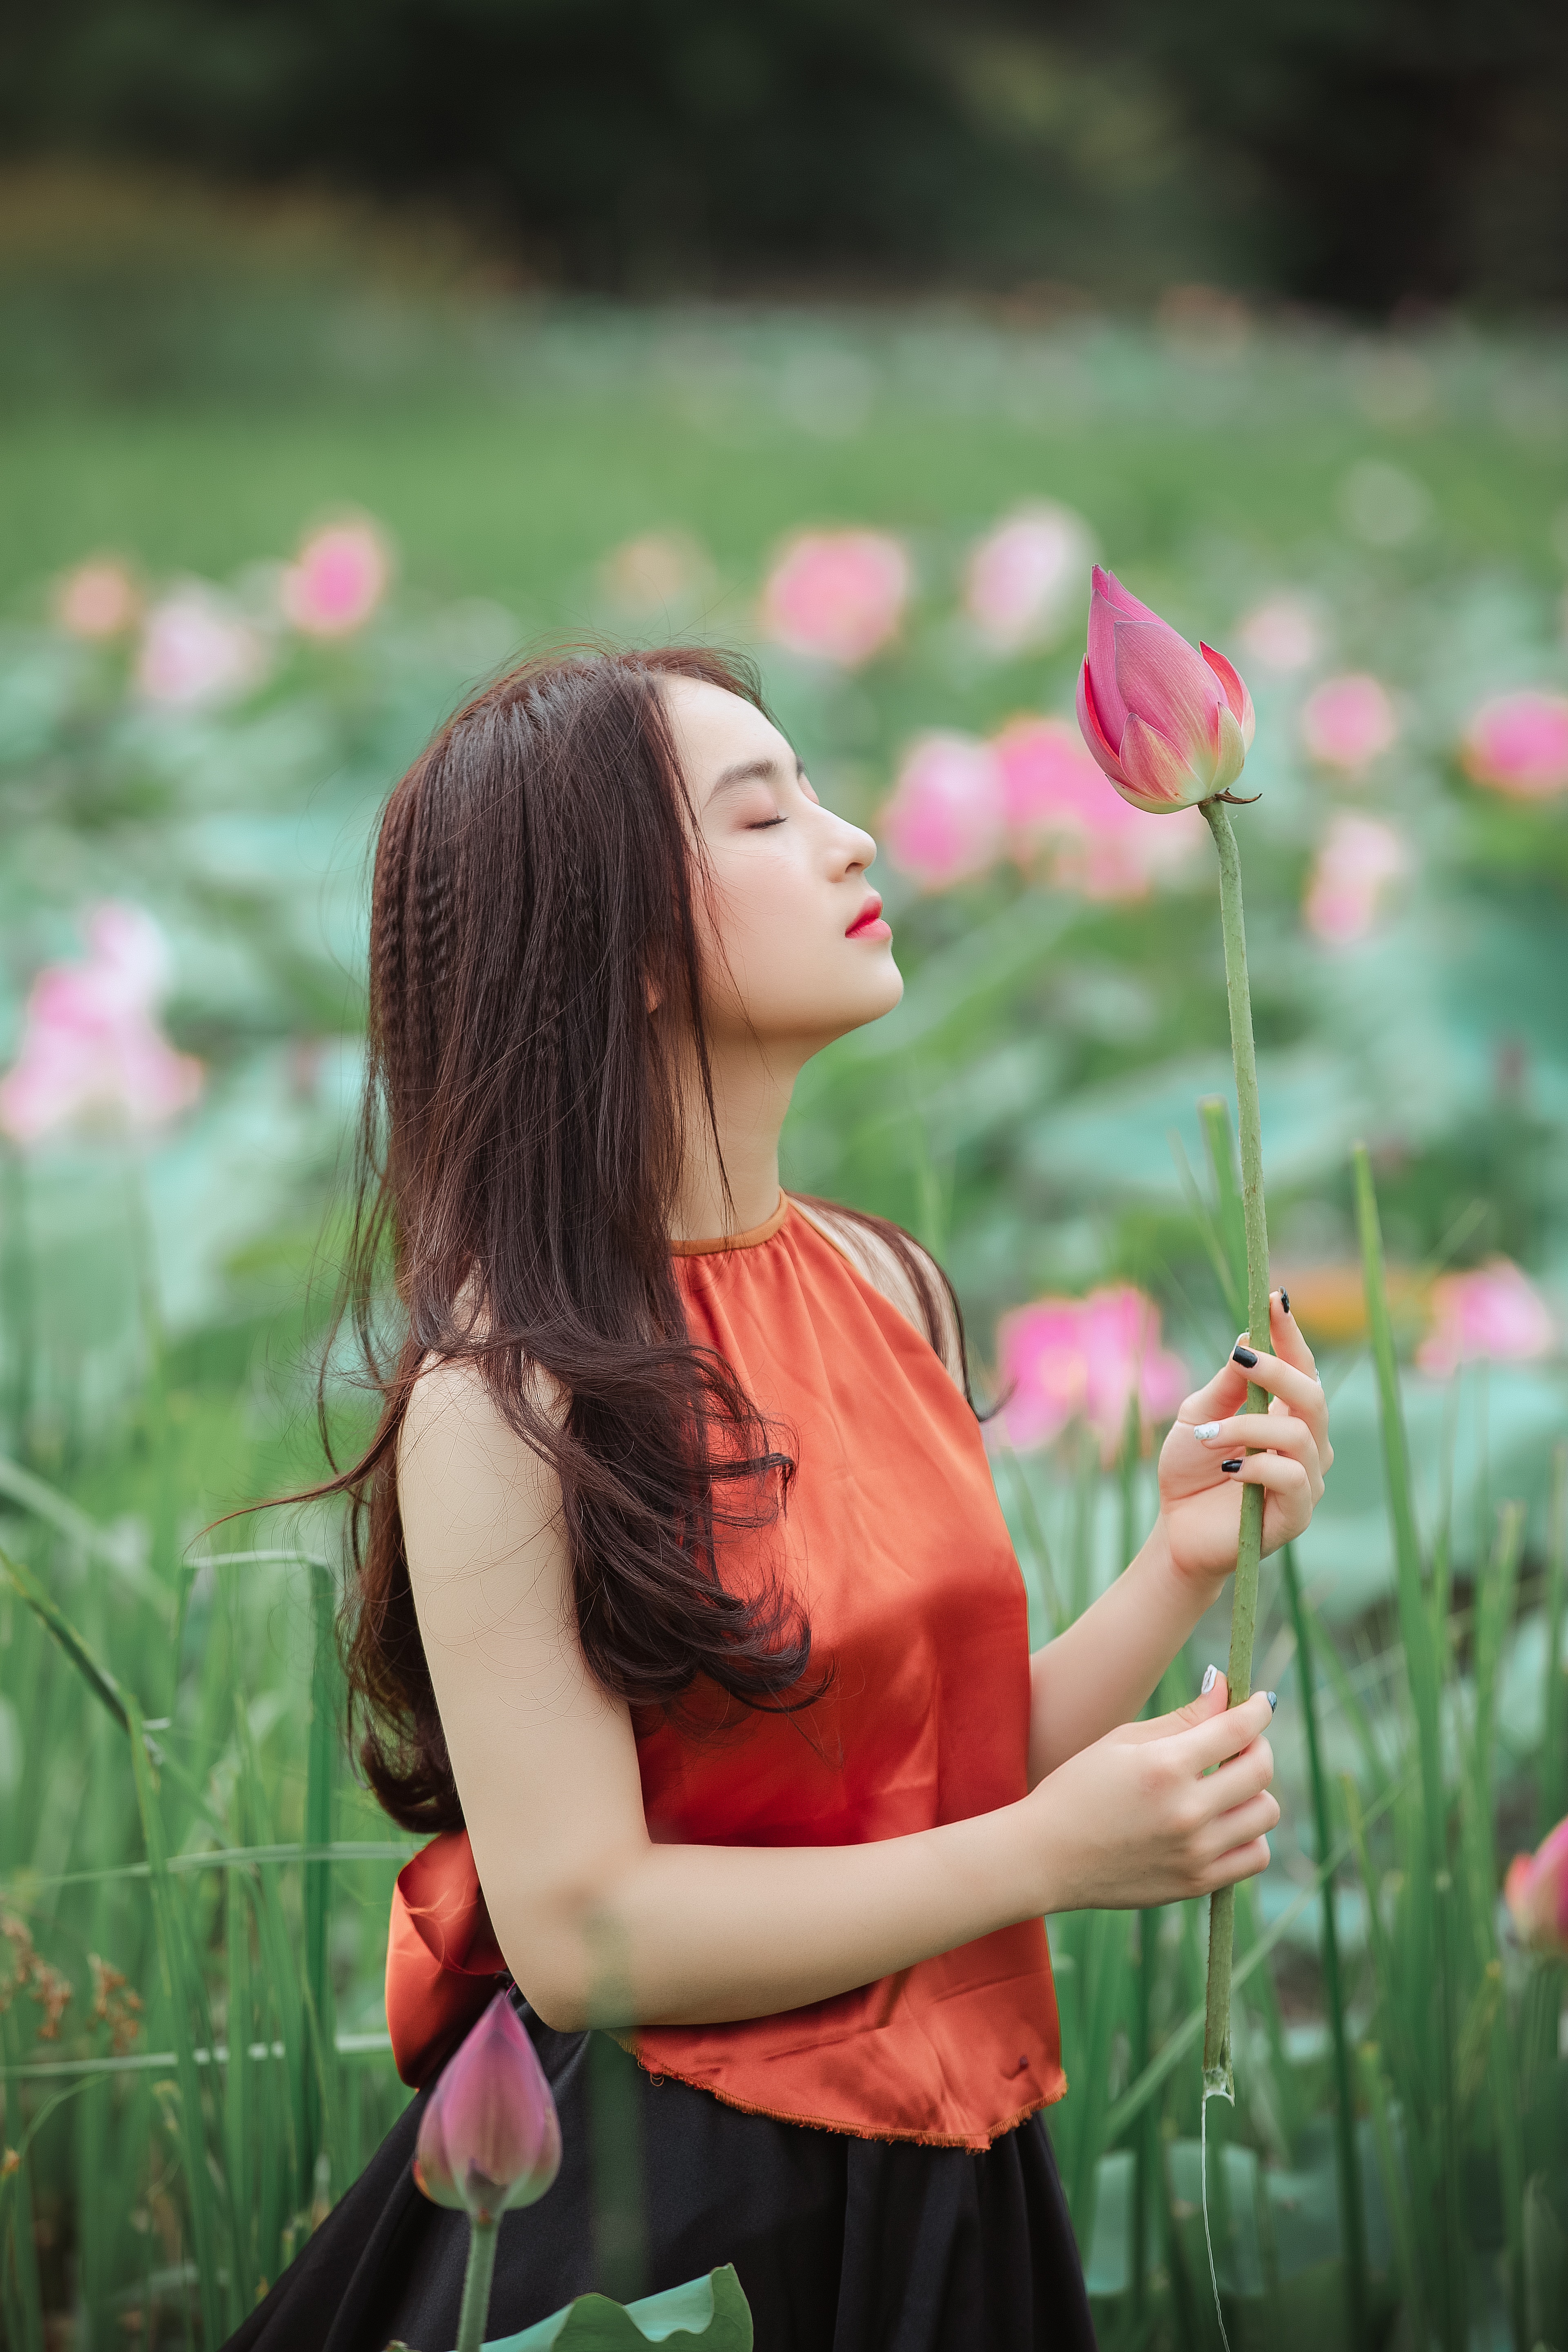 Lotus Flower With Girl - 3840x5760 Wallpaper 